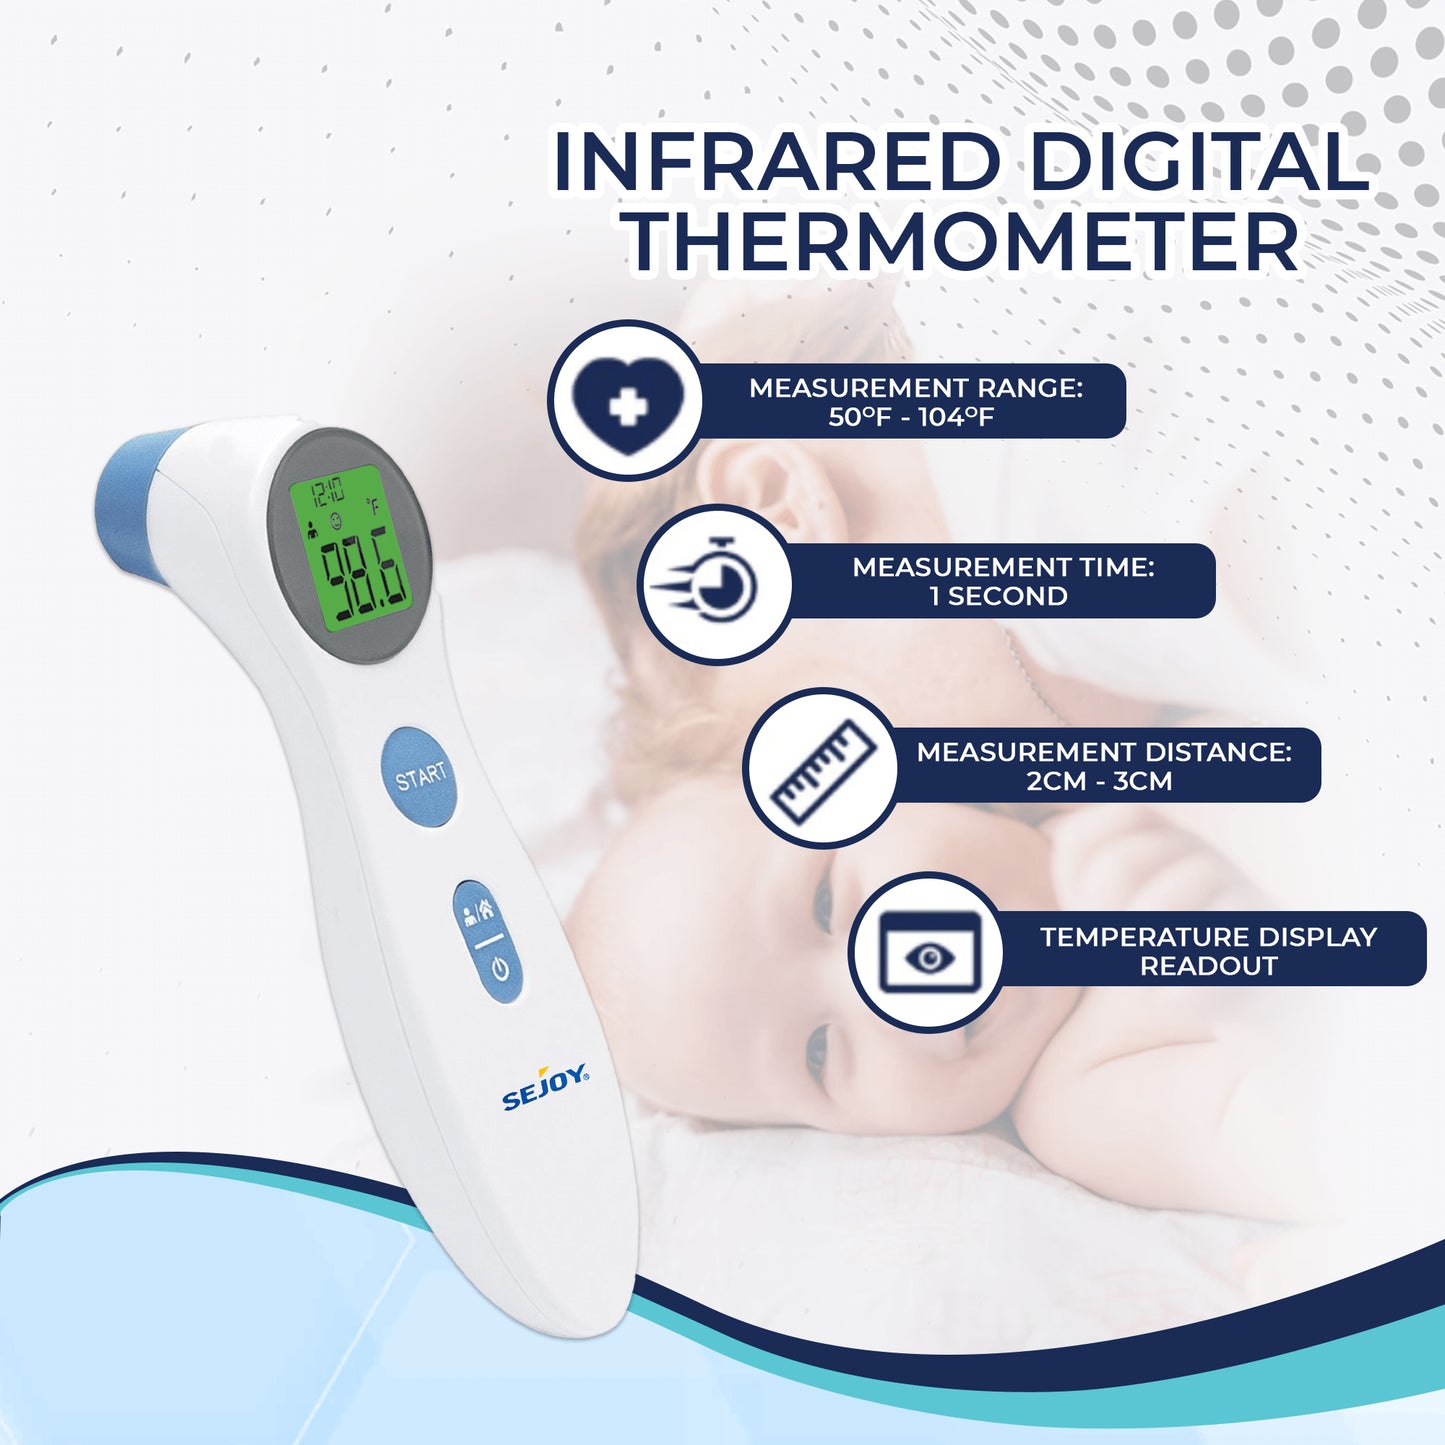 Infrared Thermometer Thermal Gun Scanner | Box of 1